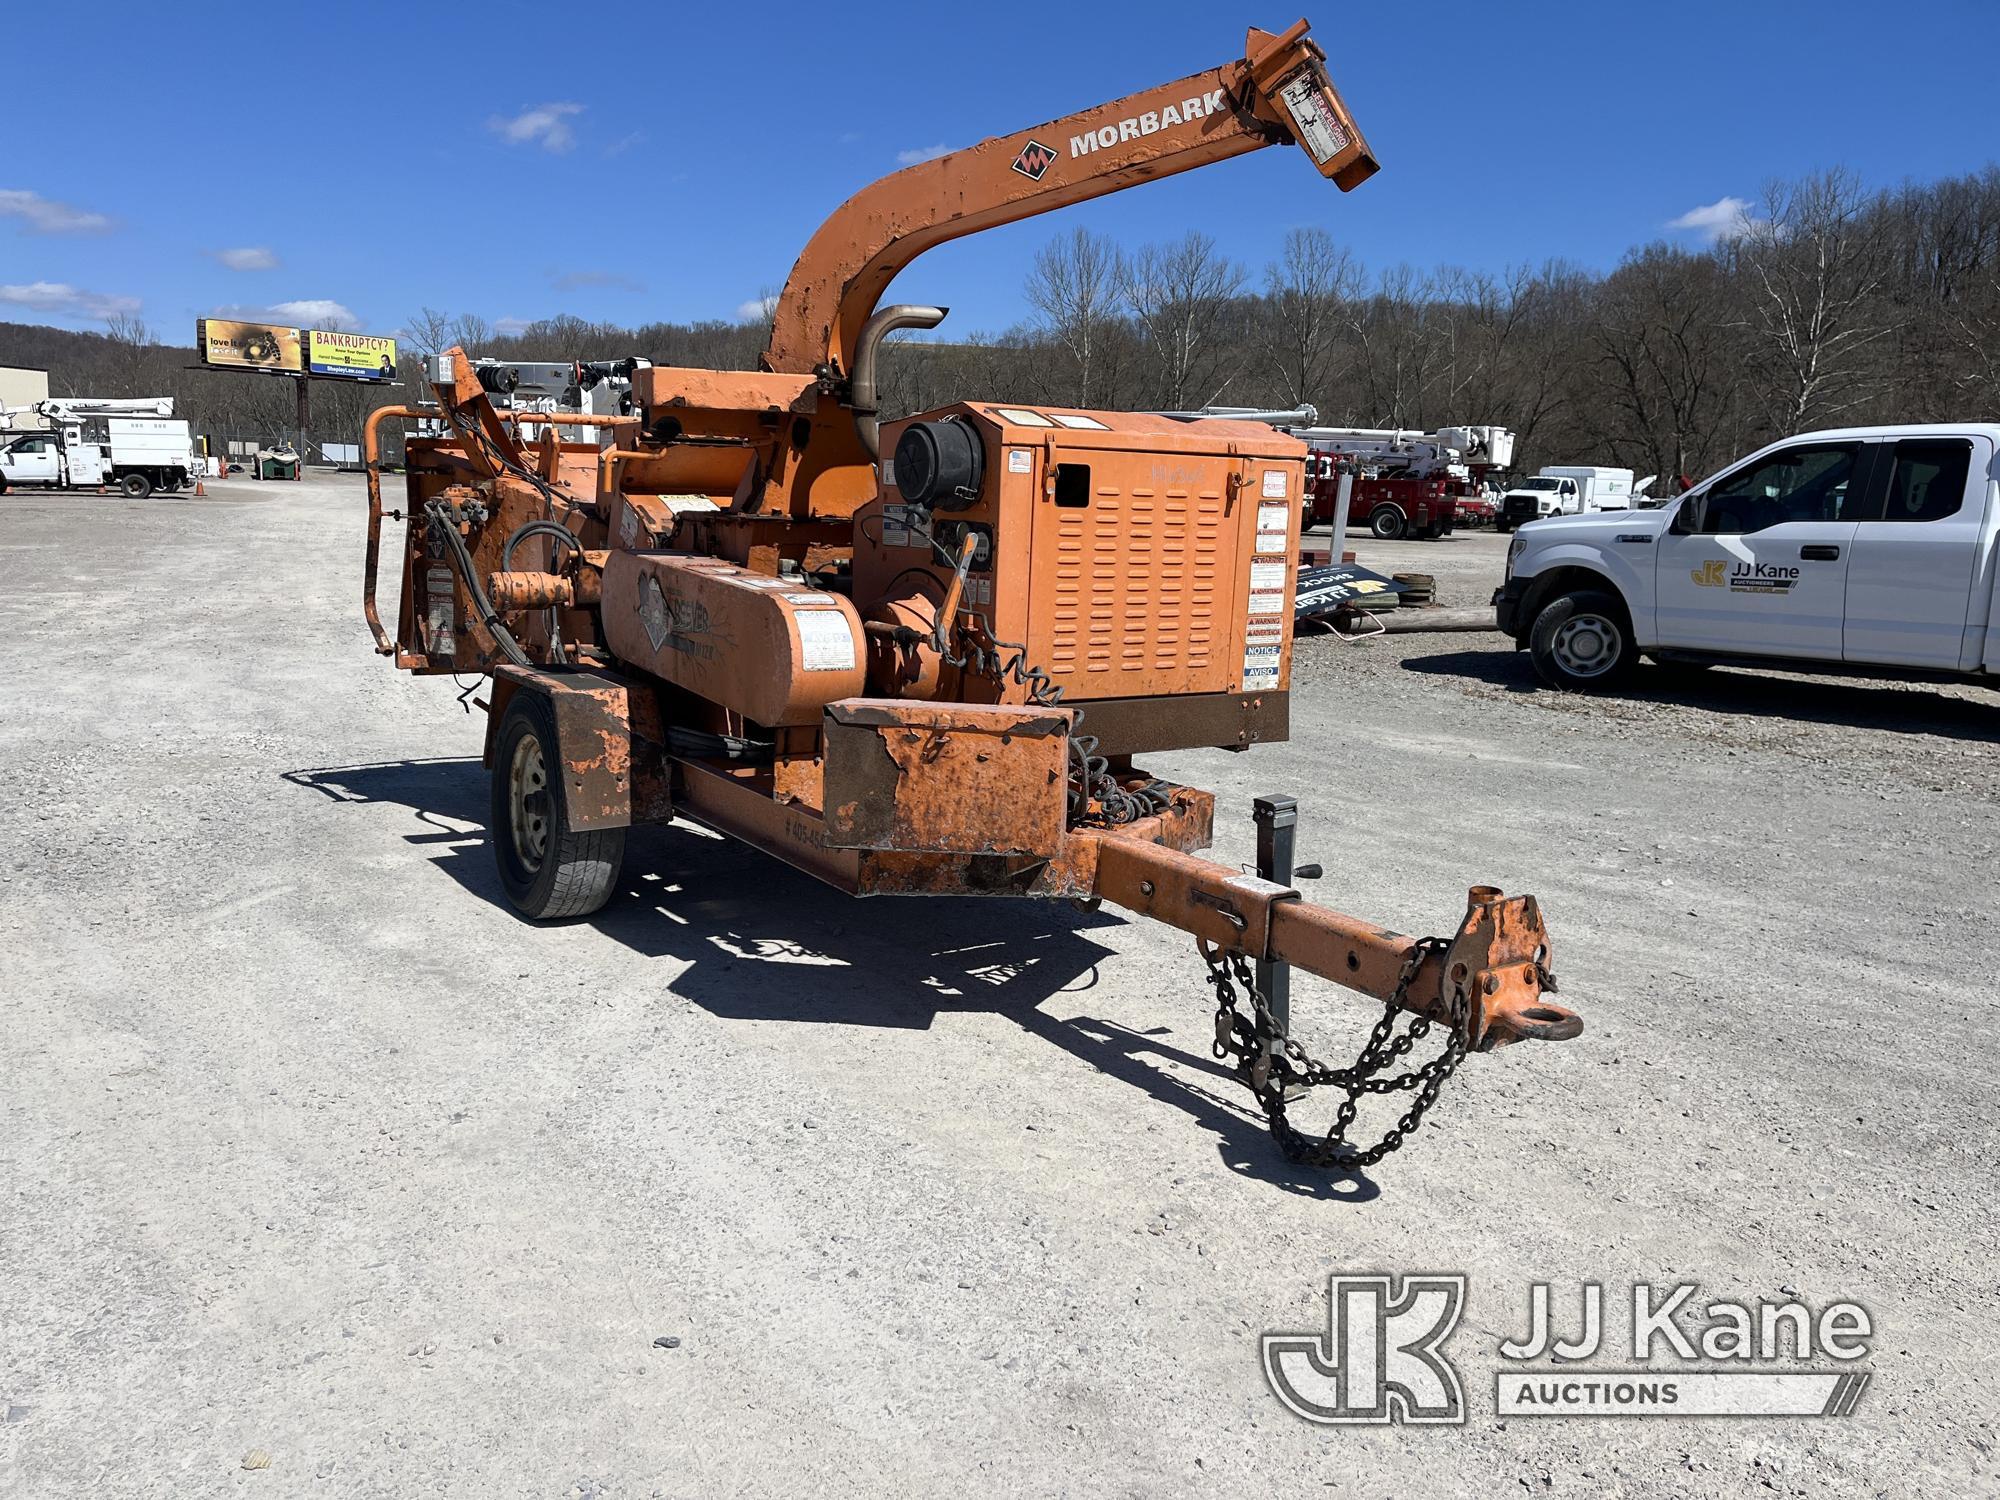 (Smock, PA) 2014 Morbark M12R Portable Chipper (12in Drum) No Title) (Not Running, Condition Unknown